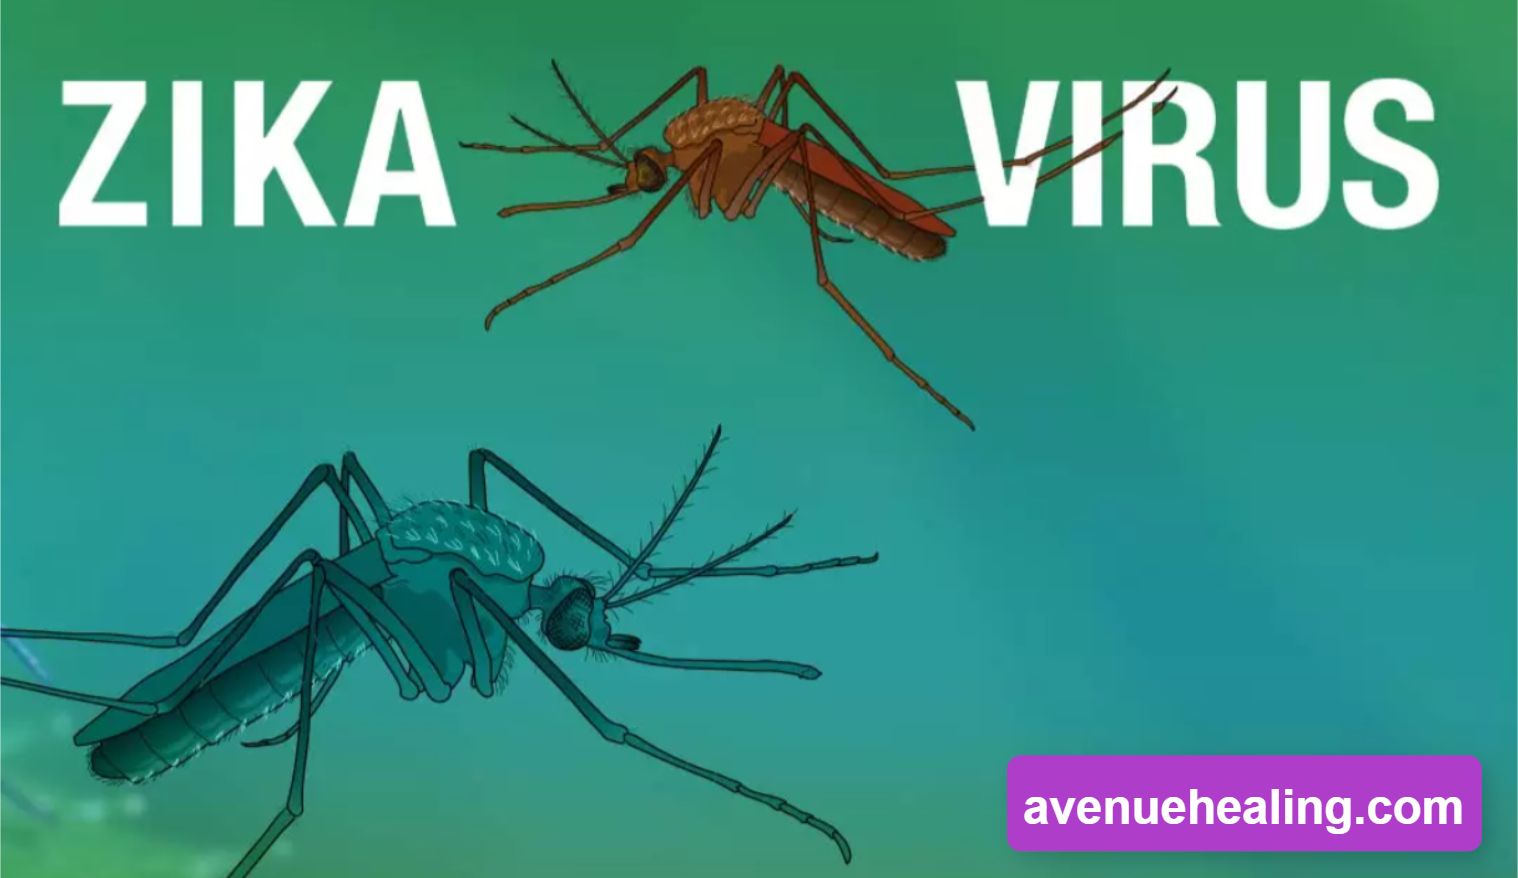 Zika Virus : Know Symptoms, Health Risks, and Ways to Stay Protected